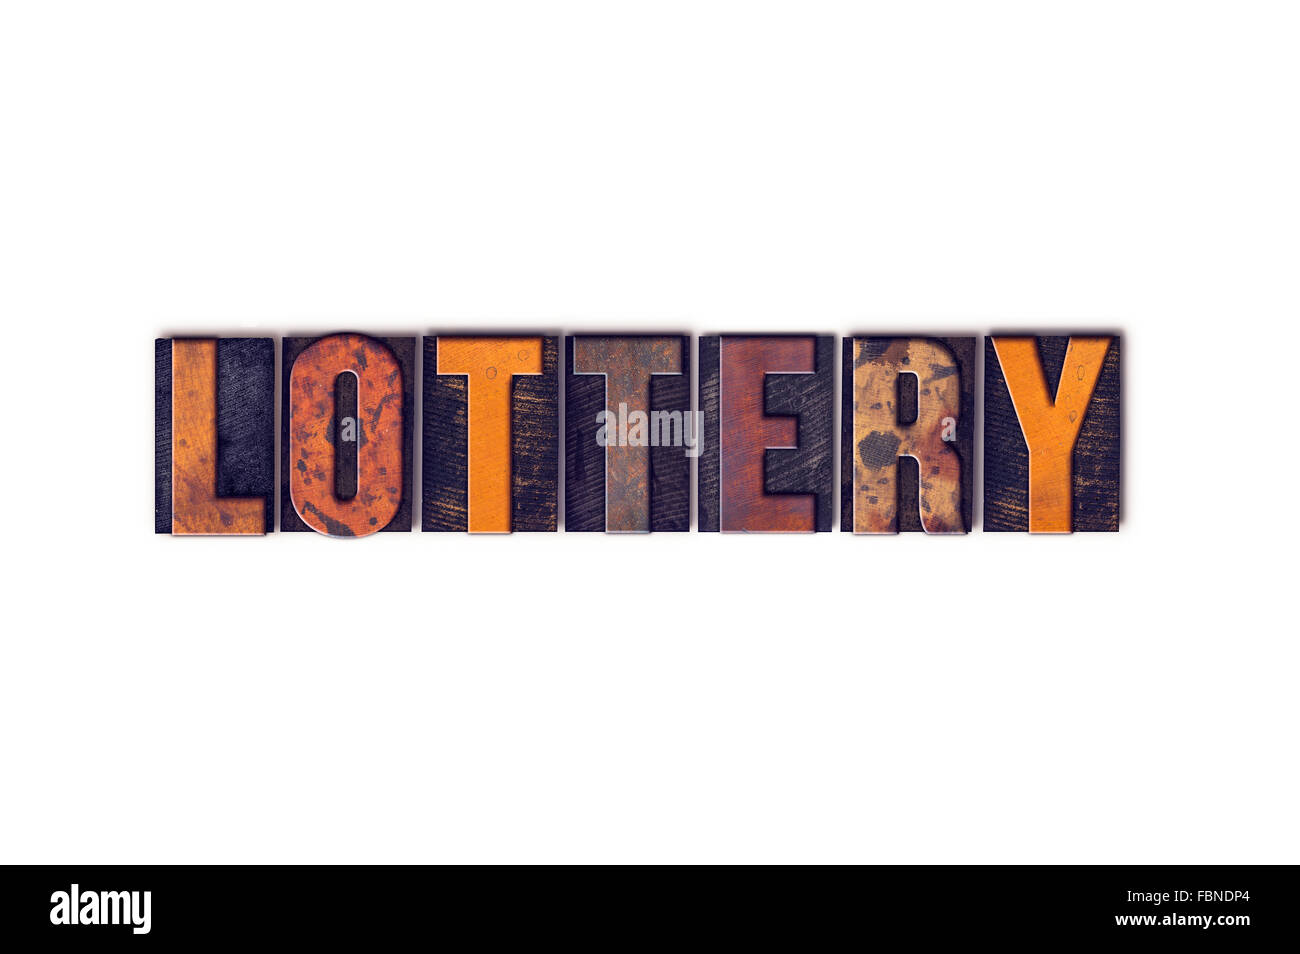 The word "Lottery" written in isolated vintage wooden letterpress type on a white background. Stock Photo